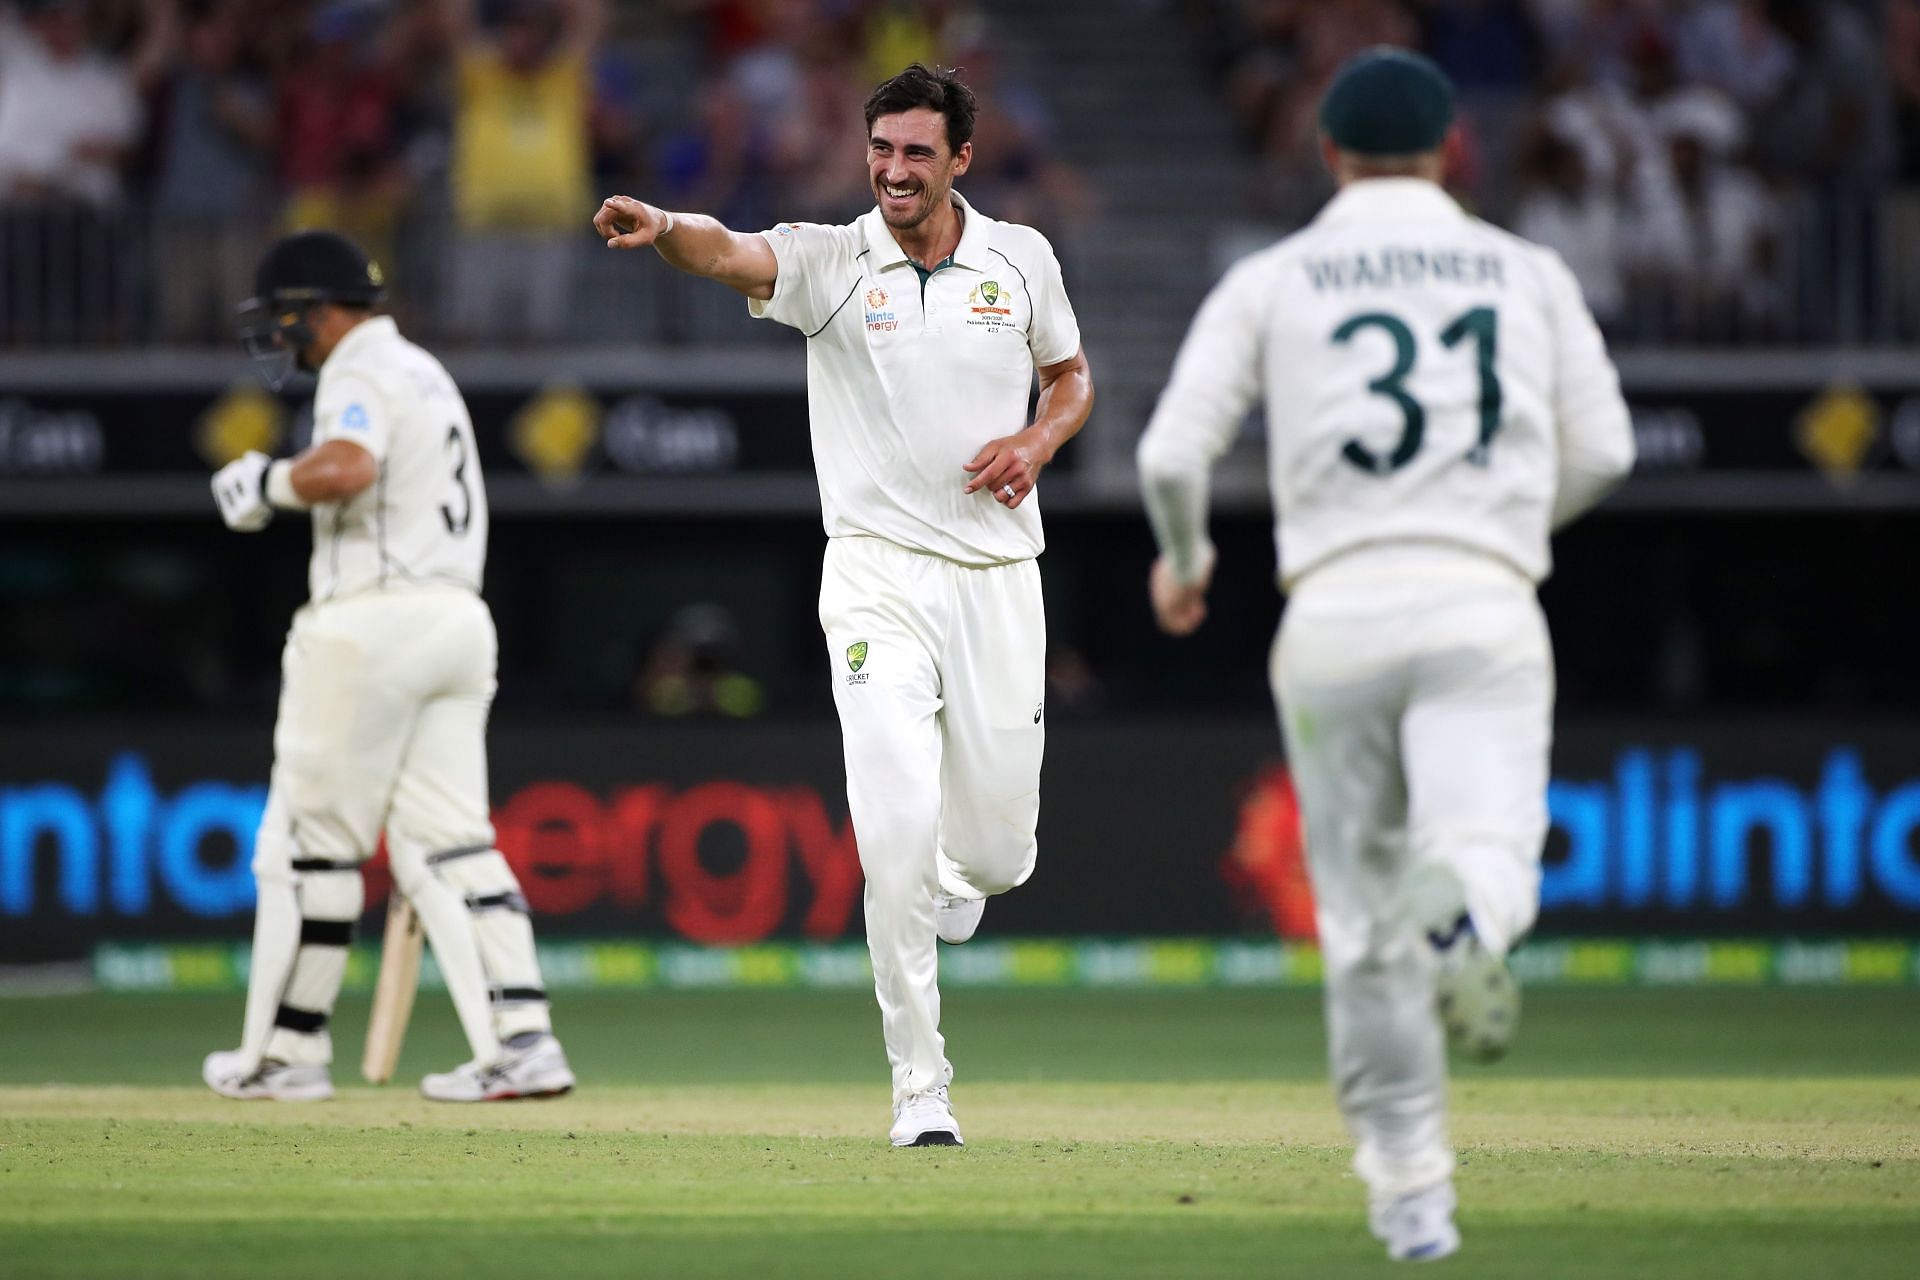 Can Starc produce some magic at the Gabba?